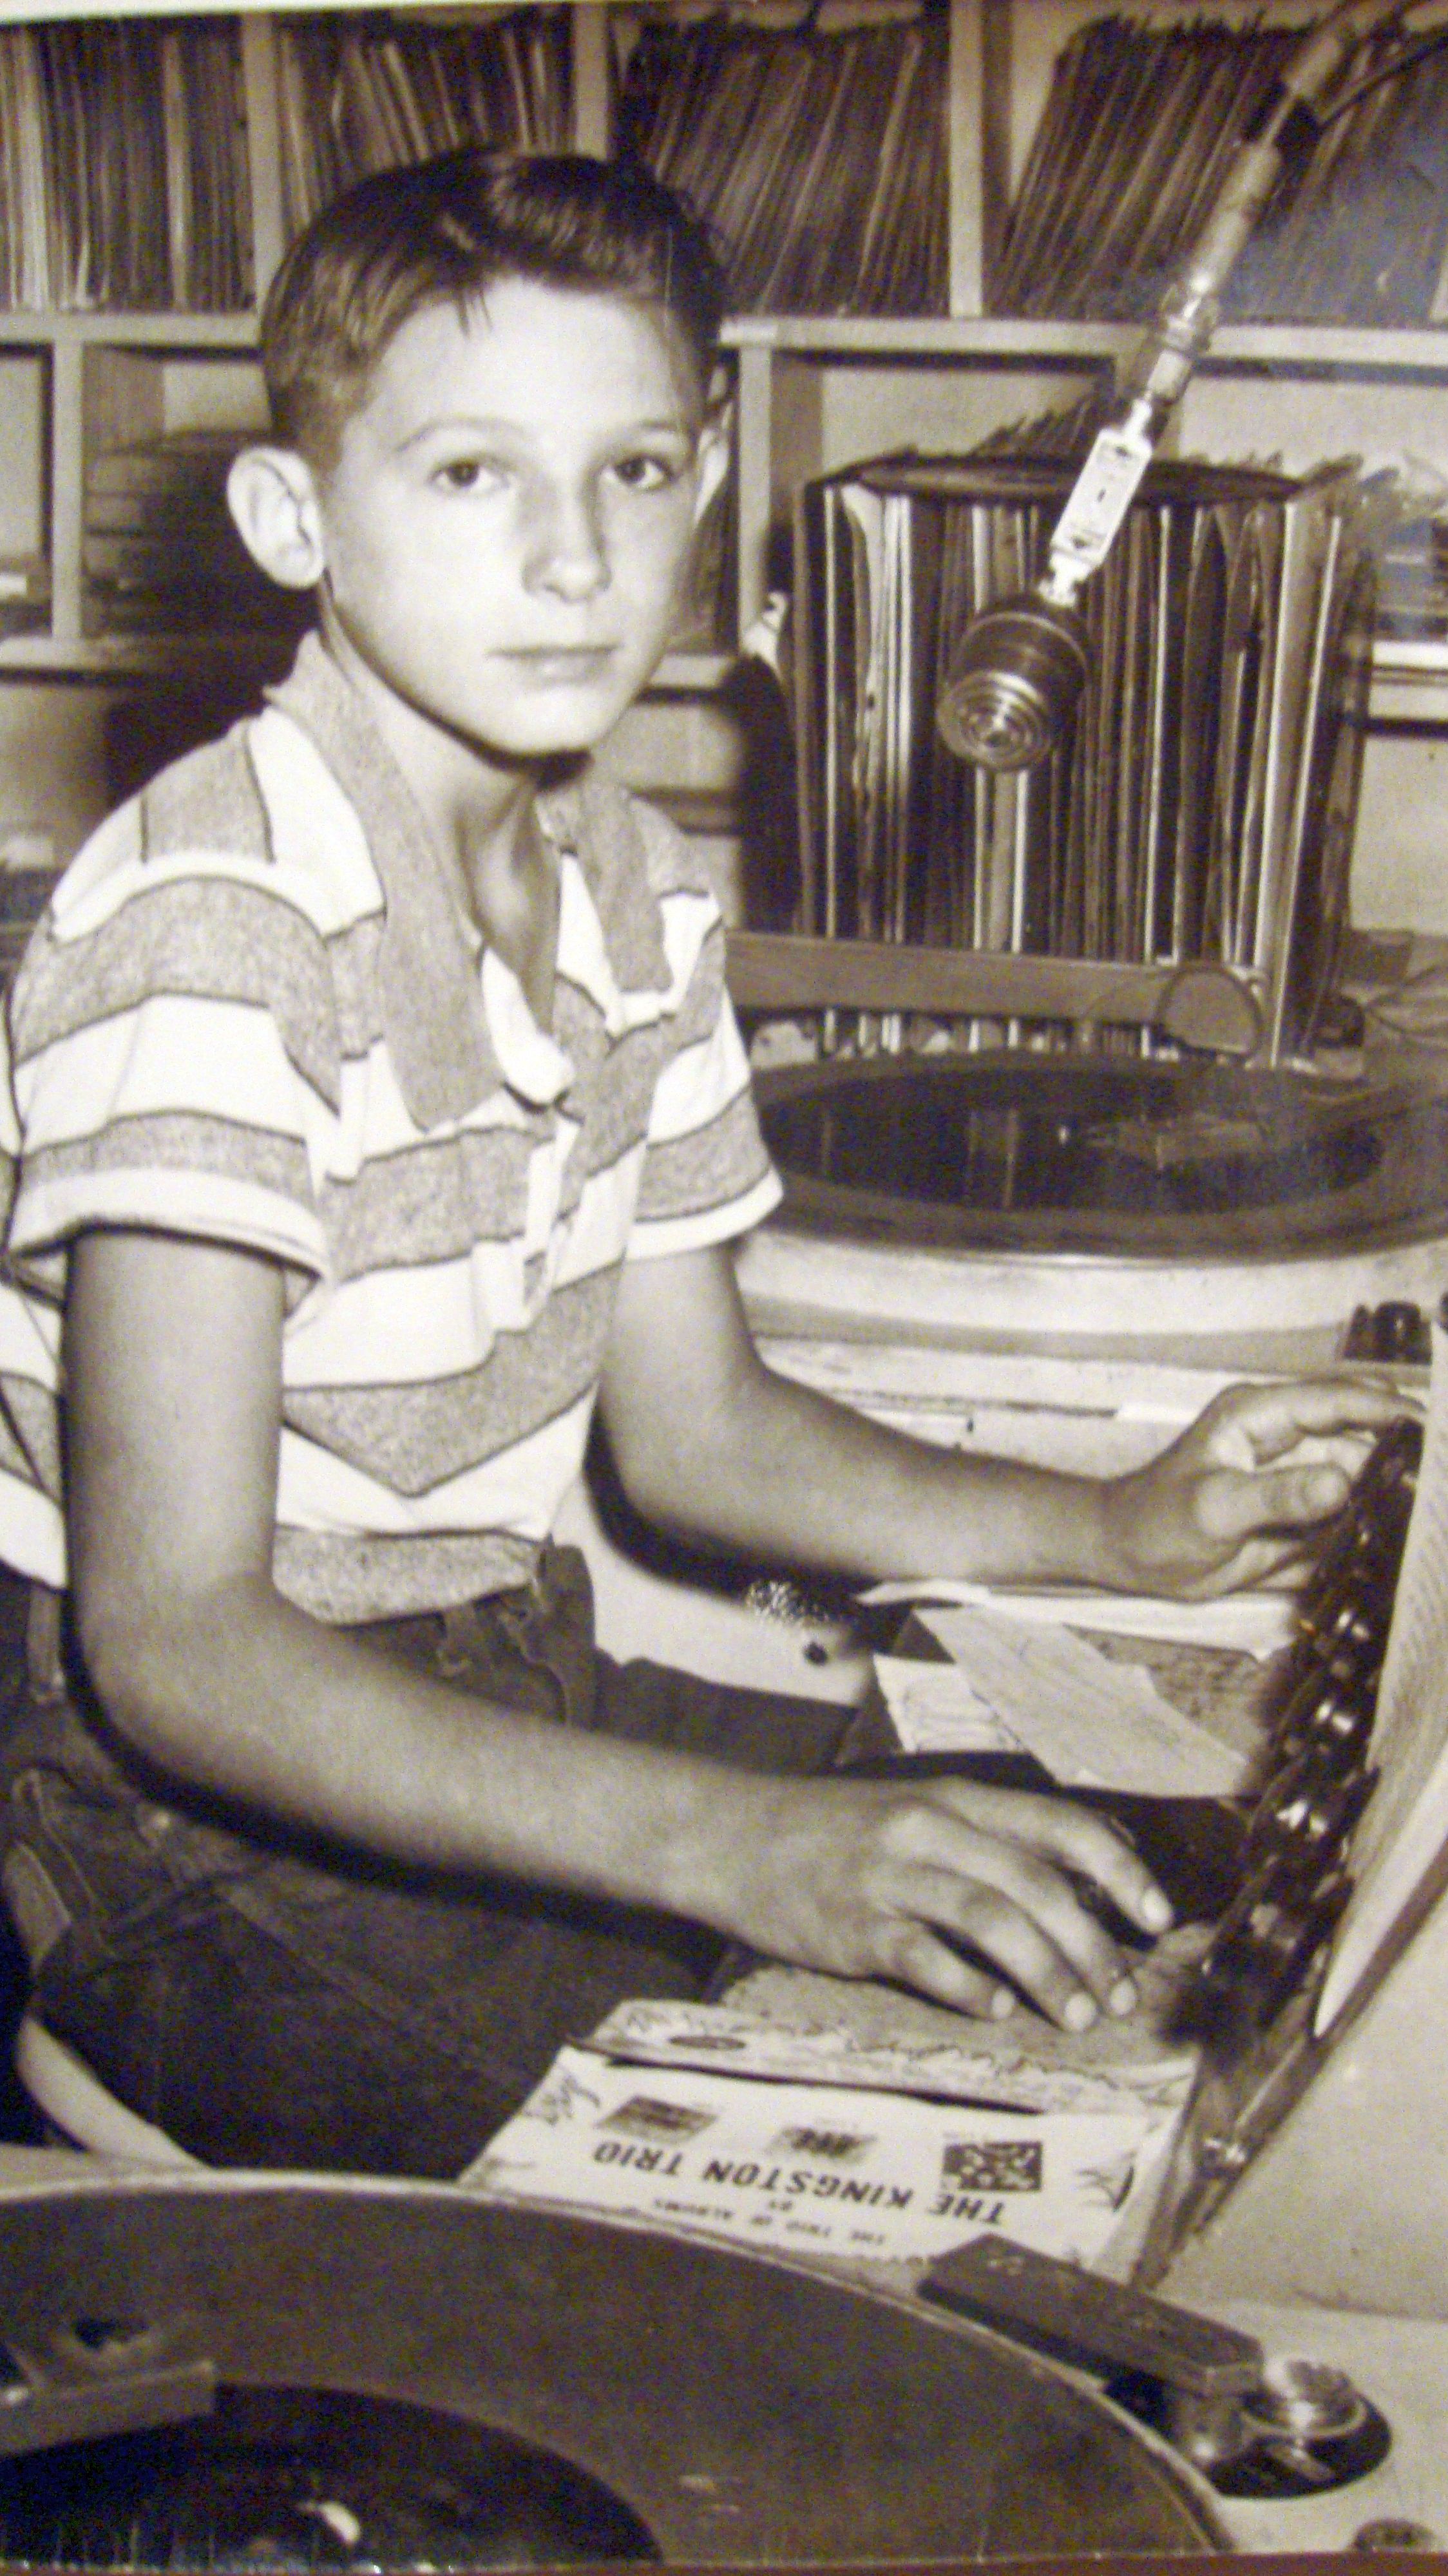 OBJ - World's Youngest DJ at age 9 - pictured here in 1959 at age 11 - KOLJ, Quanah, Texas